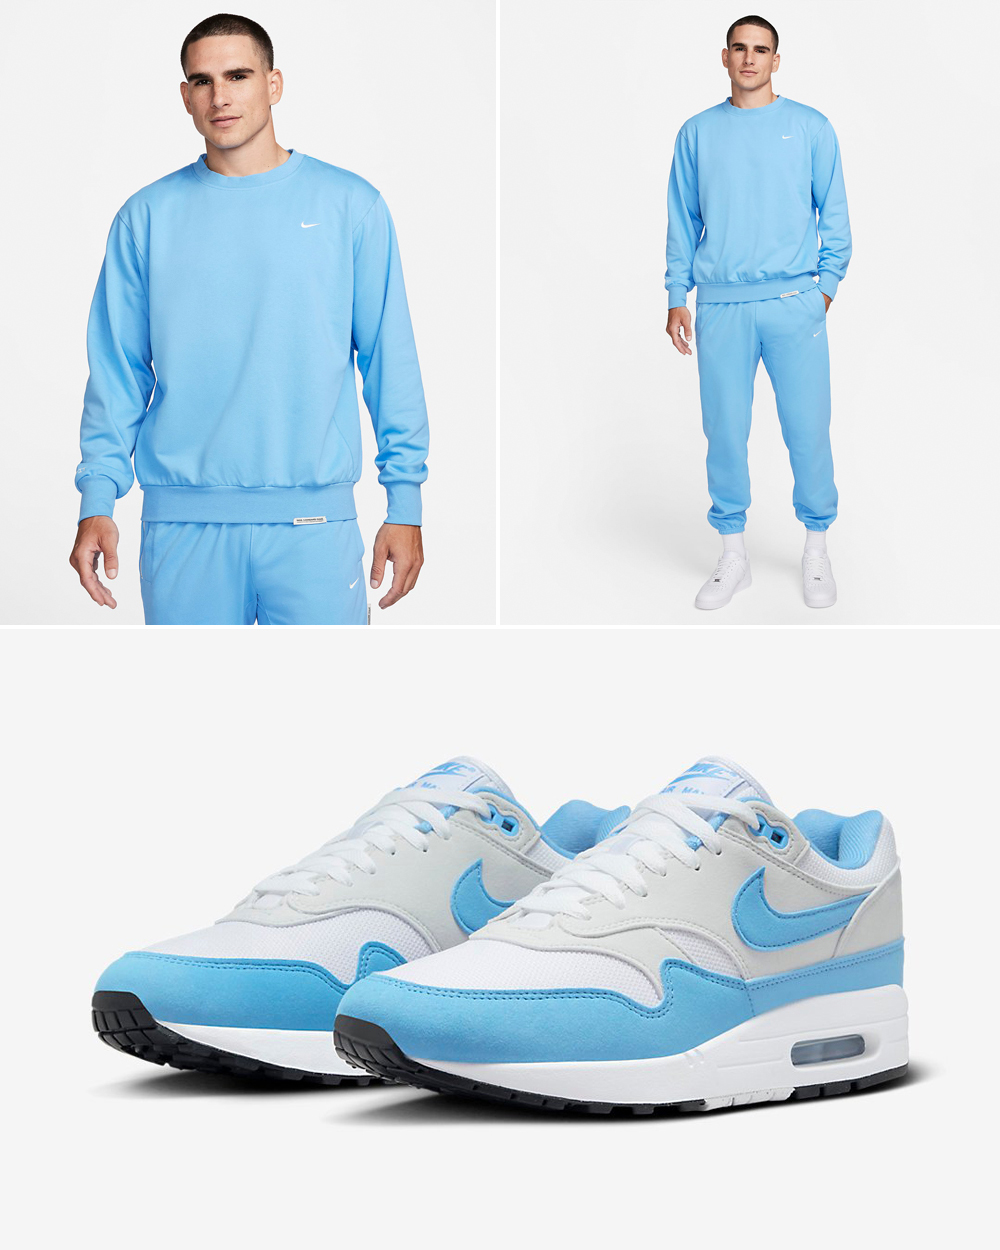 Nike-Air-Max-1-University-Blue-Outfit-1